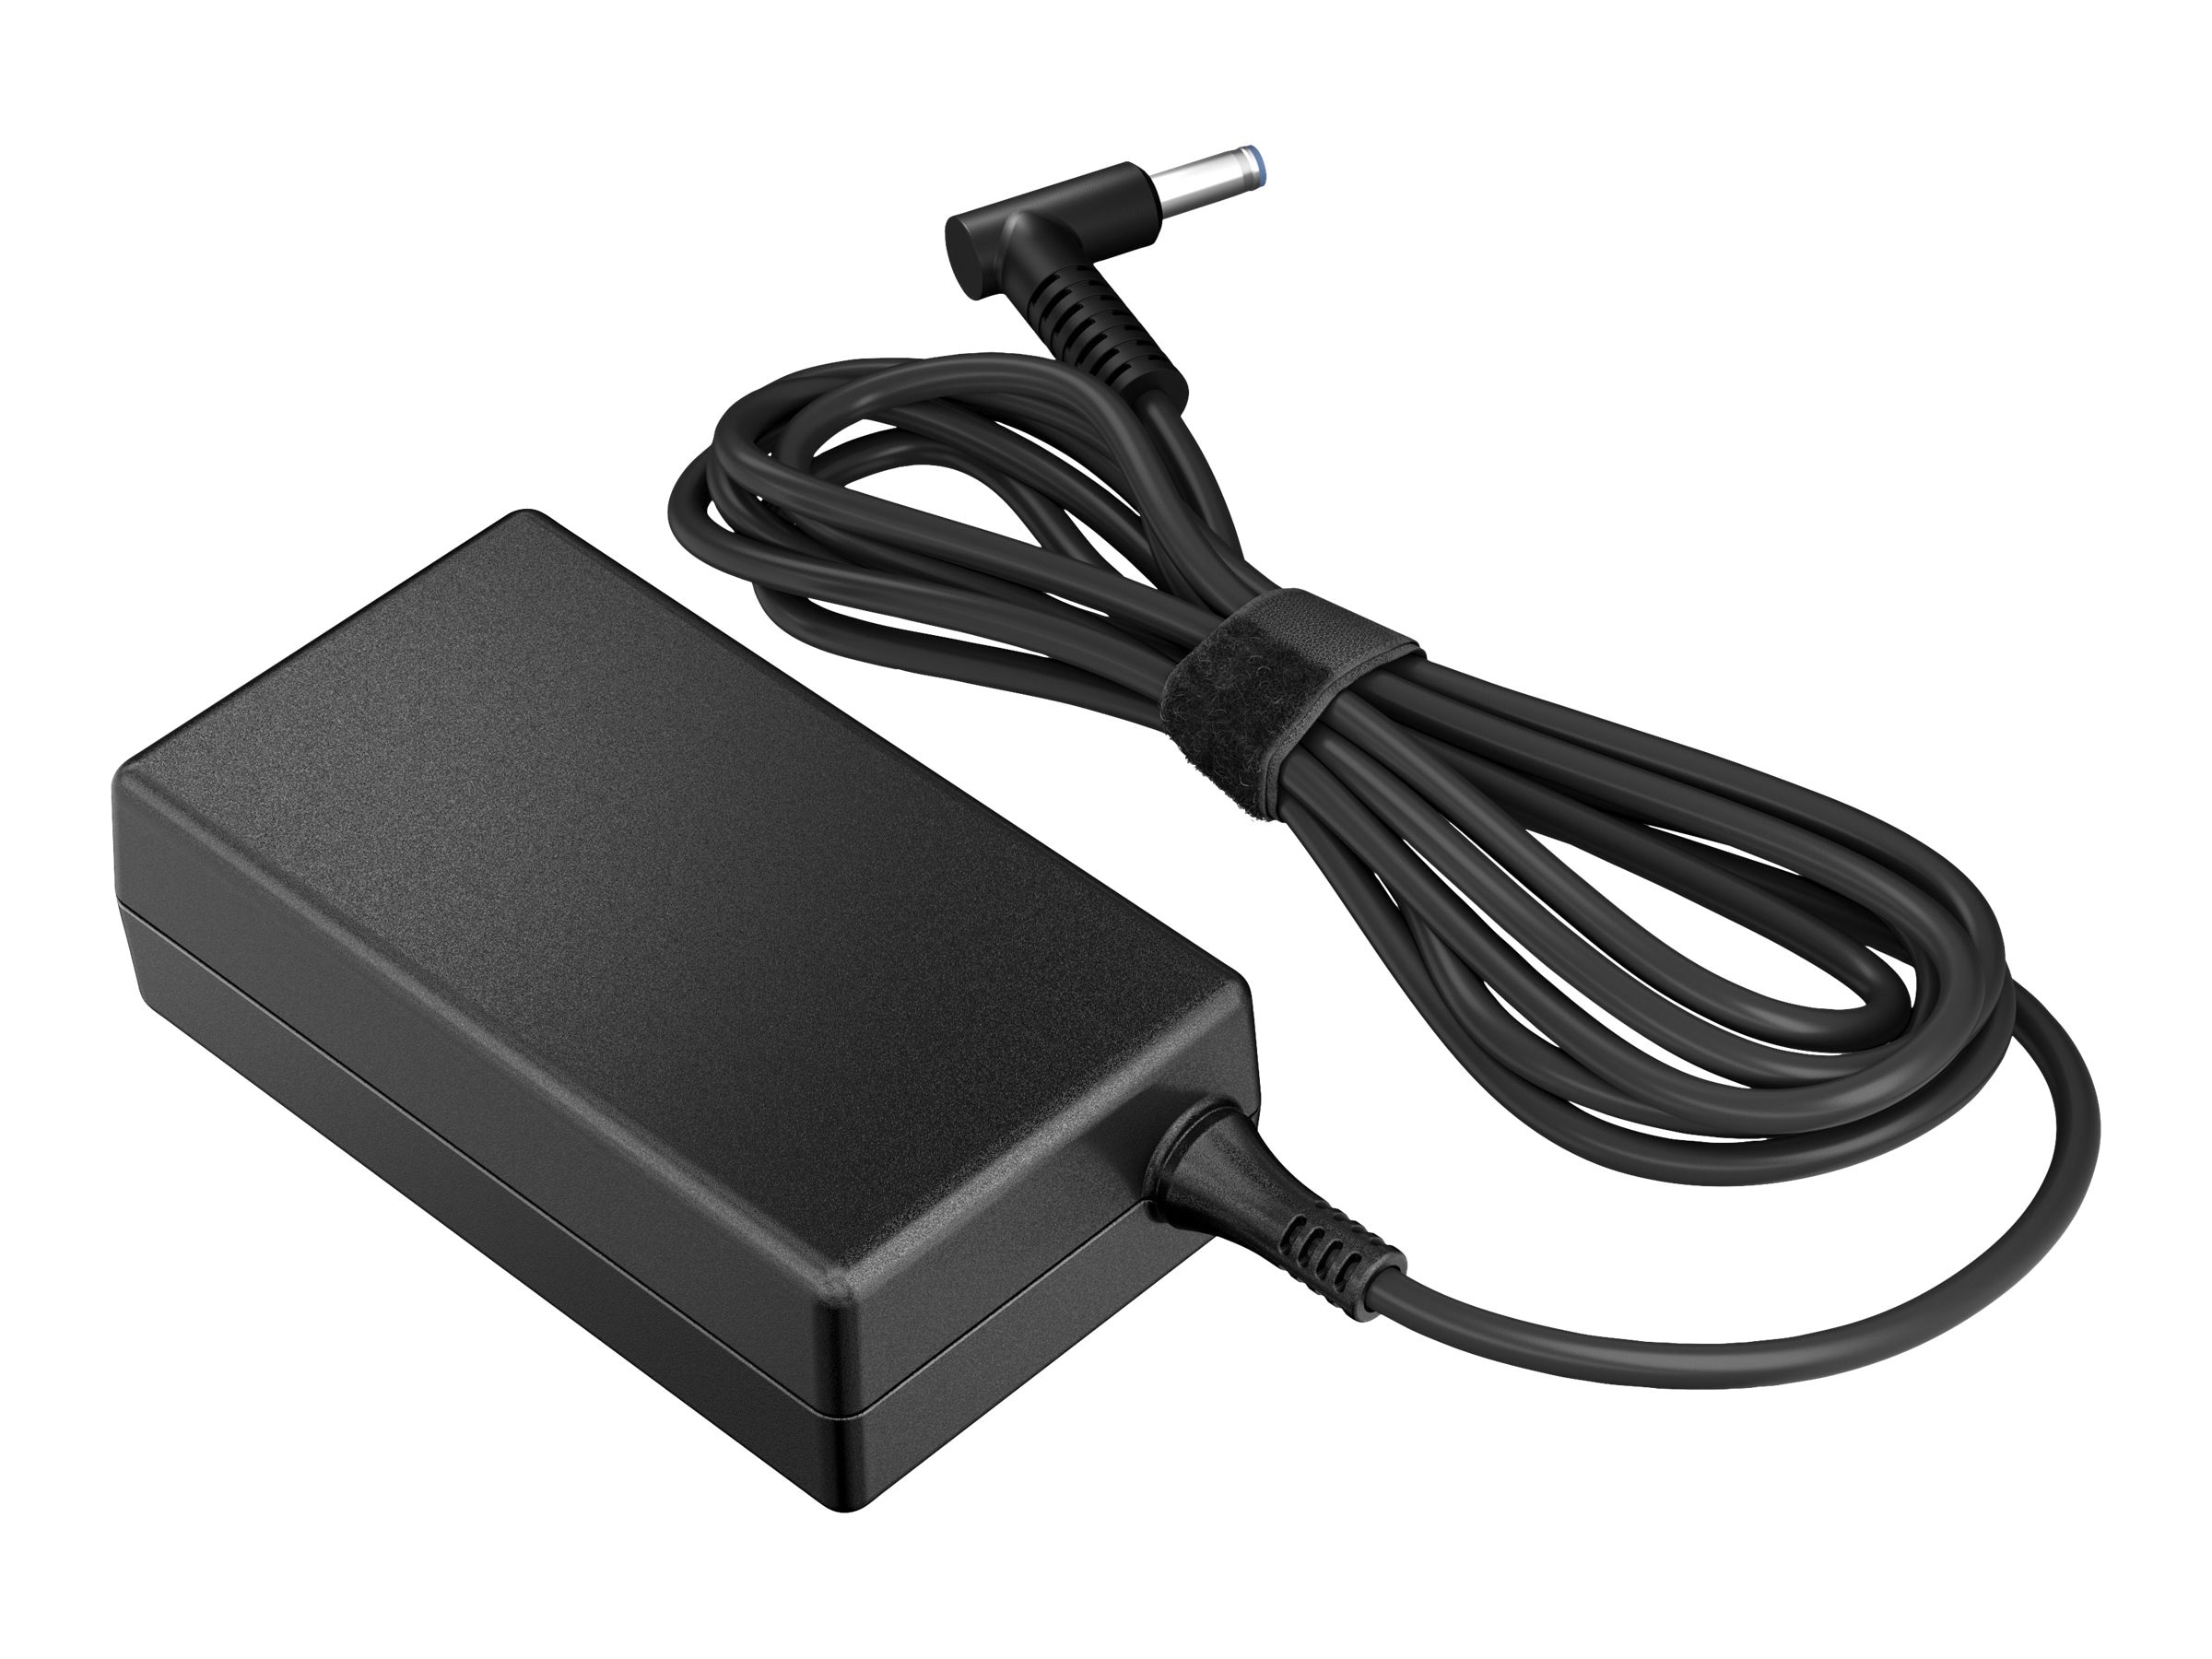 D'ORIGINE 65W AC Adapter Chargeur HP EliteBook 820 G1 - 1Chargeur